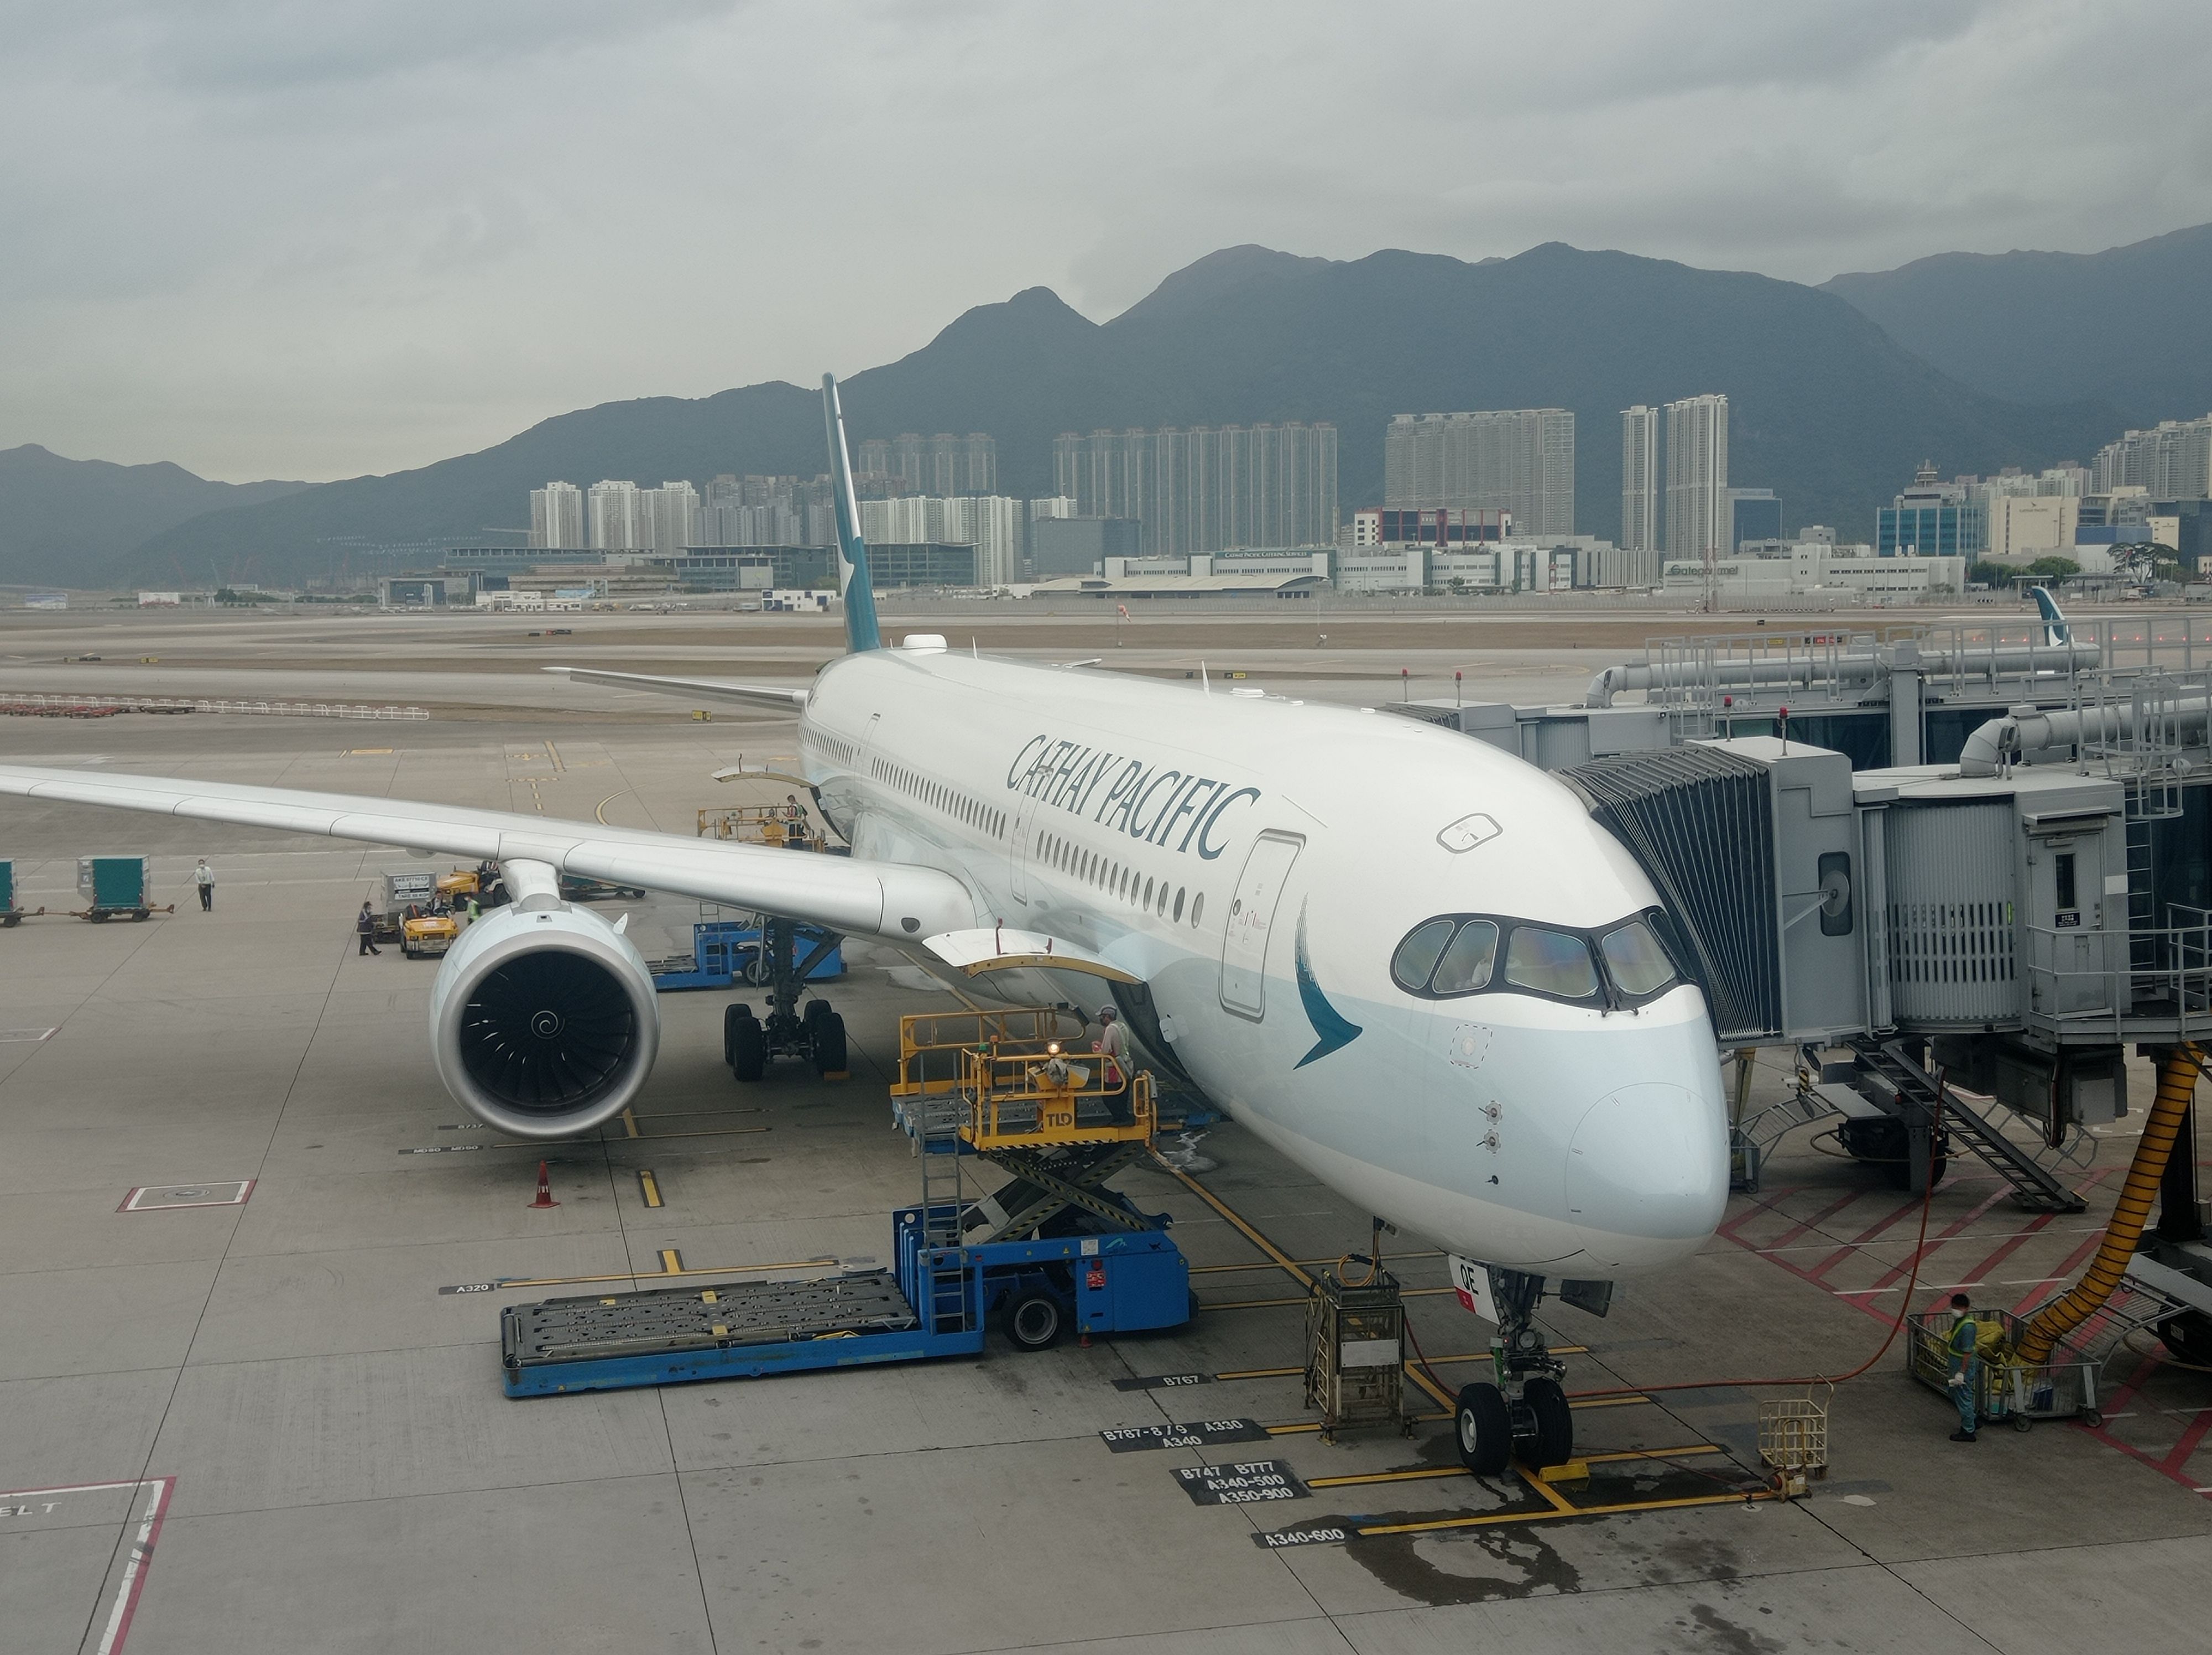 A Cathay Pacific A350 parked at the gate.